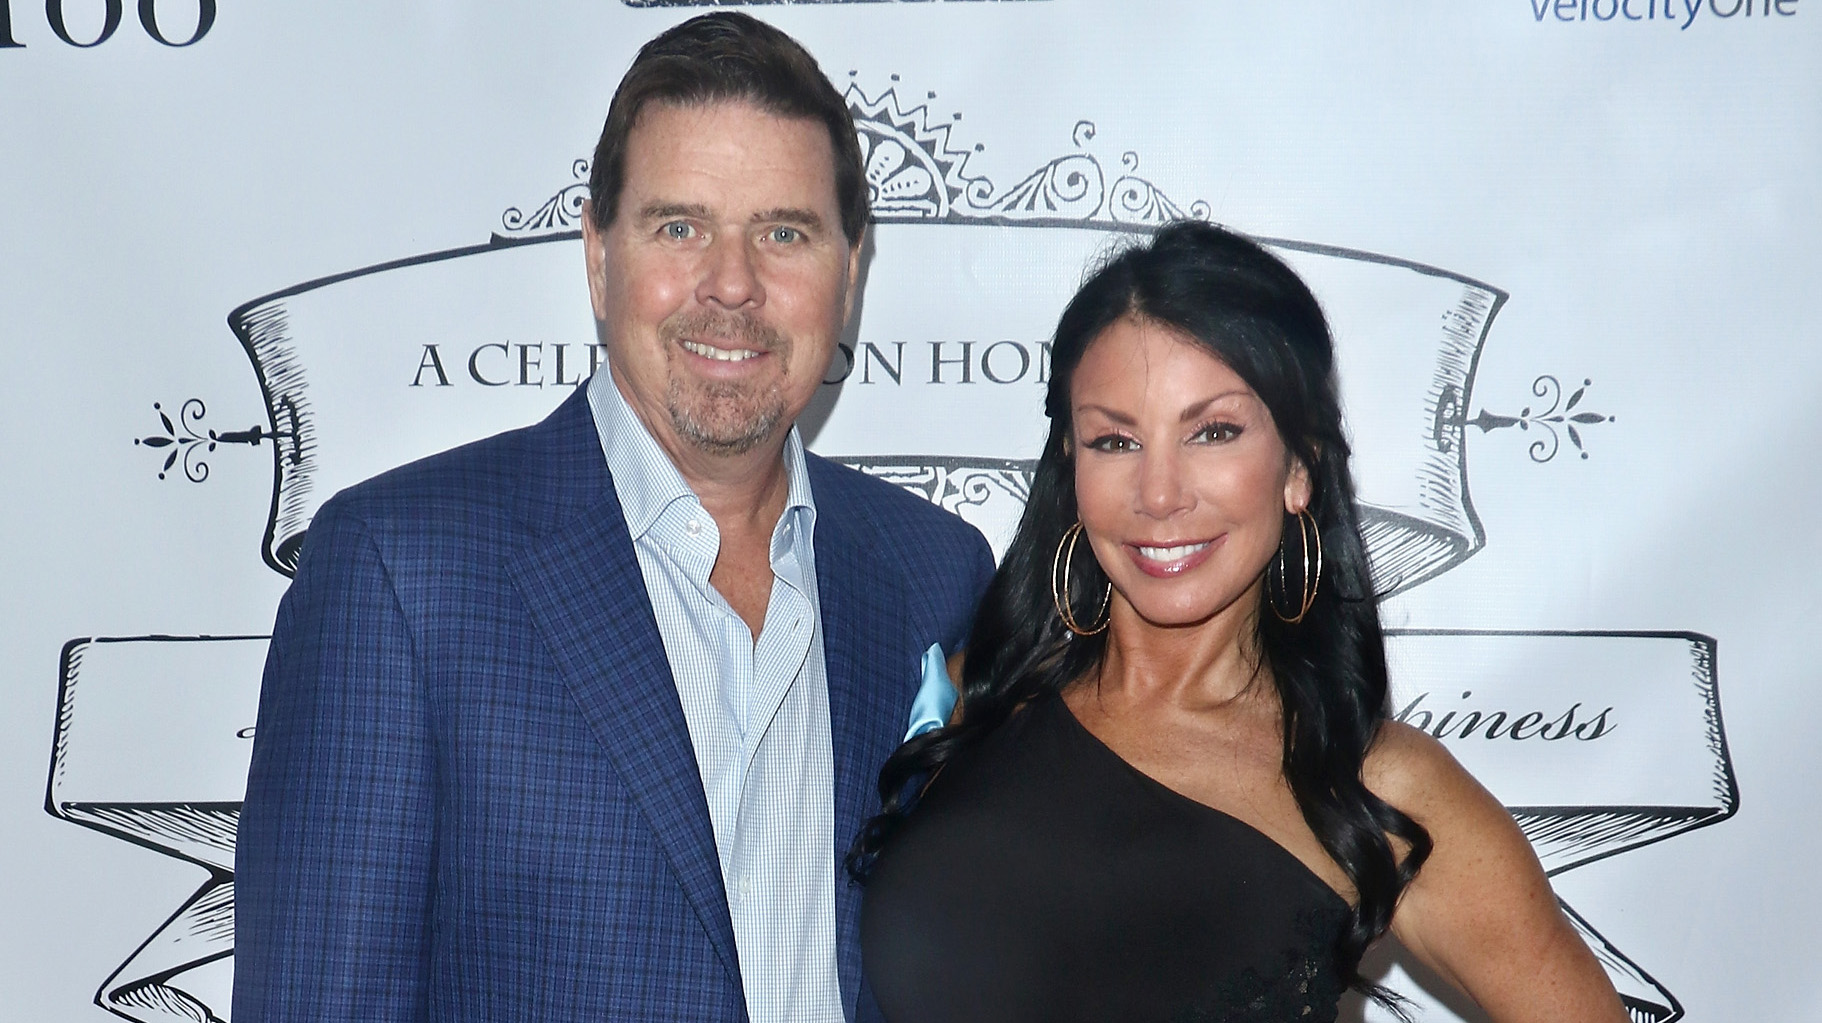 Who Is Danielle Staub Engaged To? Get Details on Her Current Relationship